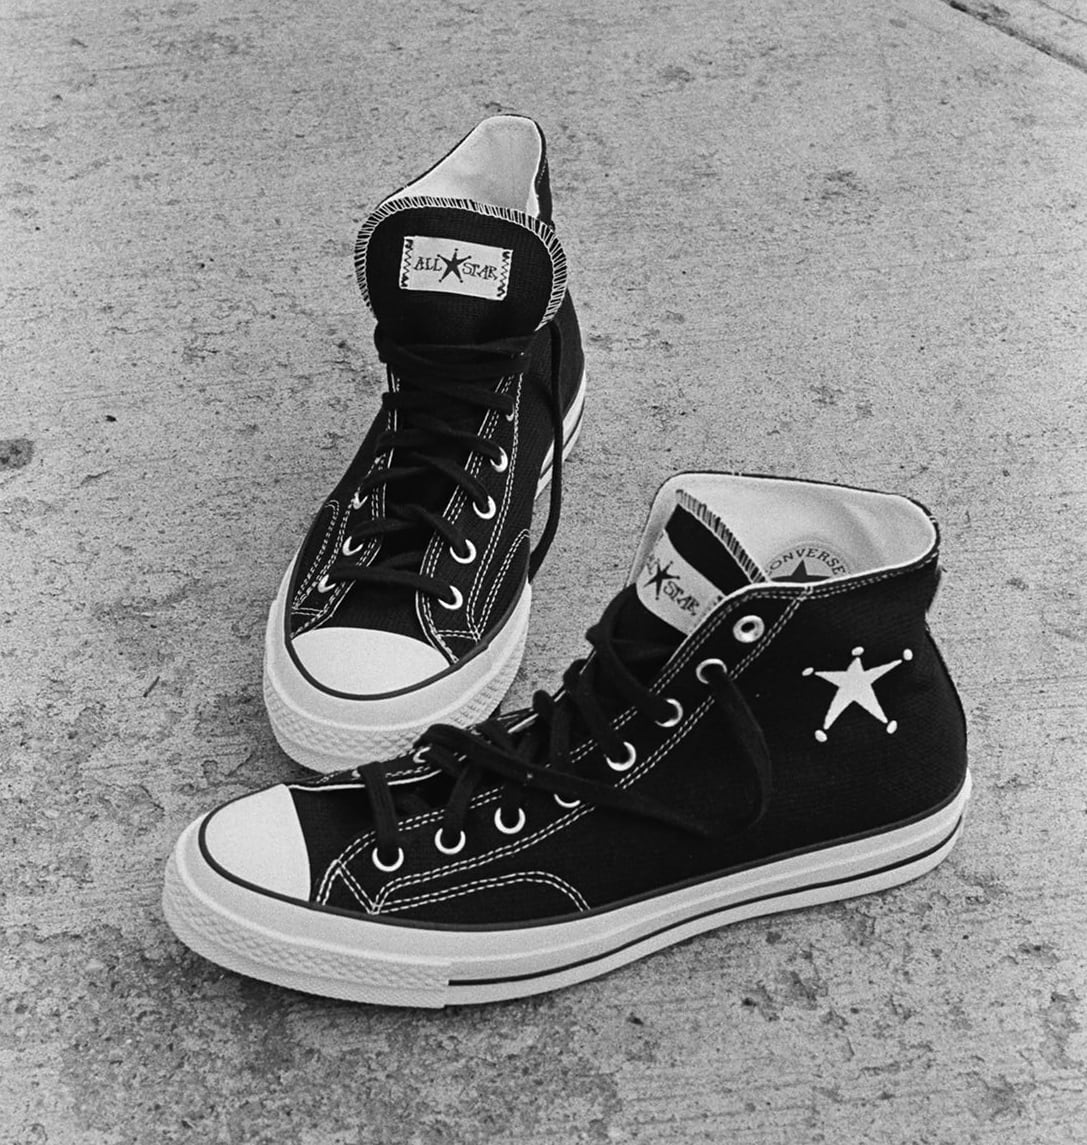 Stussy x Converse Chuck 70 Hi 'Black' and 'Pearl' Release Date March 2023 |  Sole Collector